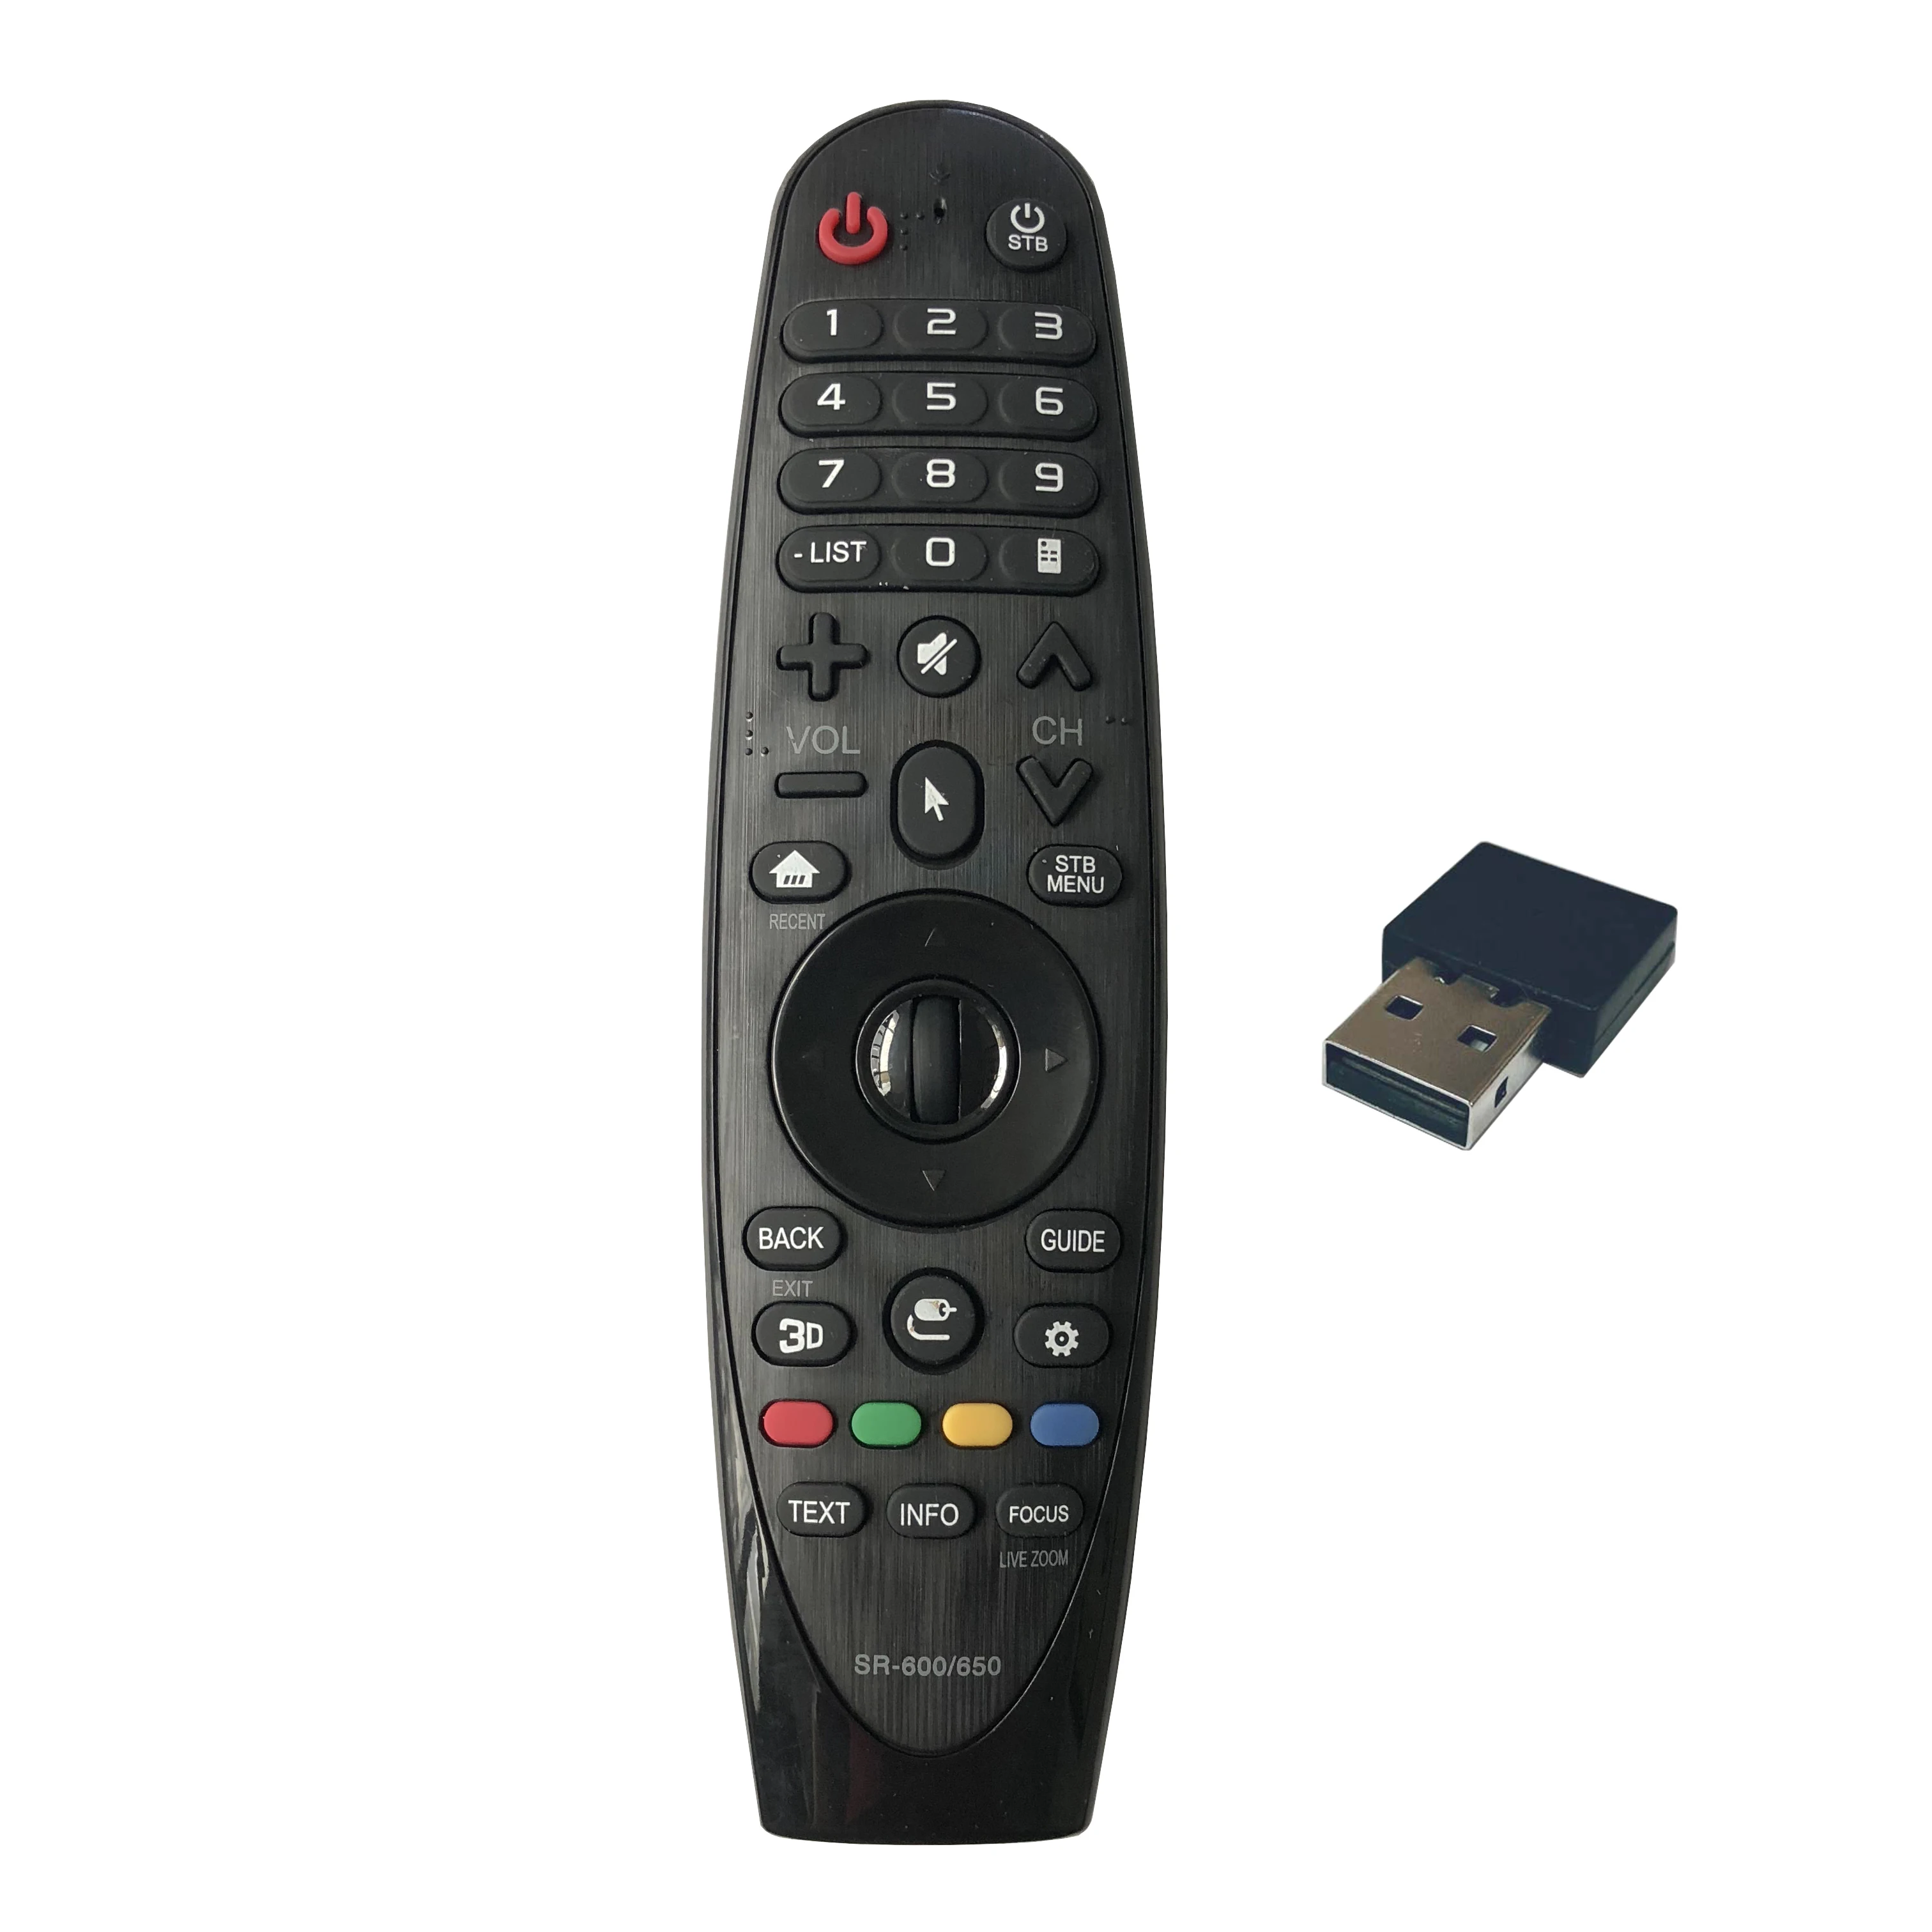 New Replacement Am-hr650a For Smart Tv An-mr650a Uj63 Series 49uk6200 55uk6200 43uj634v 55uj620y 2017 Smart Tv Magic Remote Control -